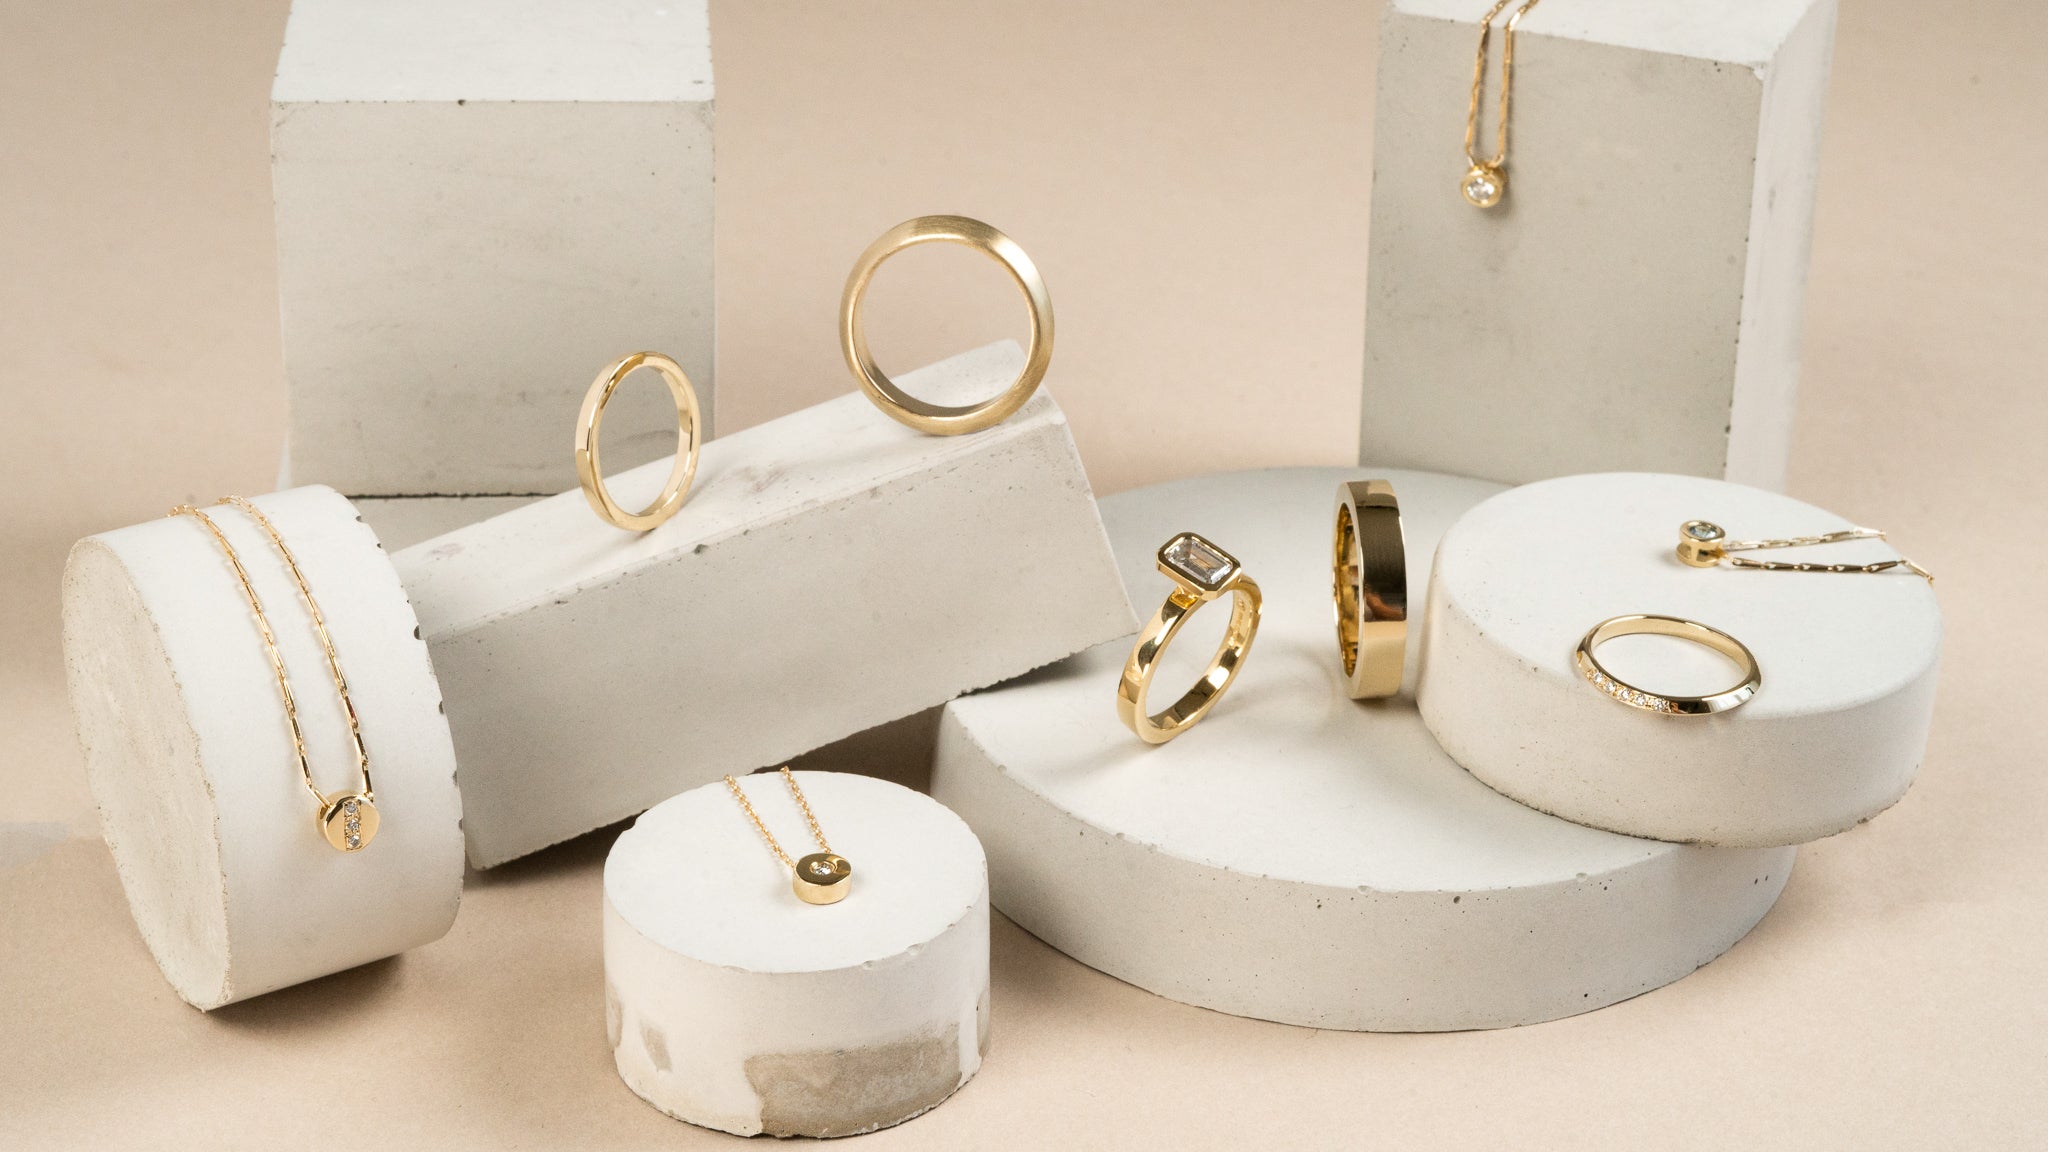 Fairmined gold and recycled wedding and engagement rings. Ethical jewellery U.K.